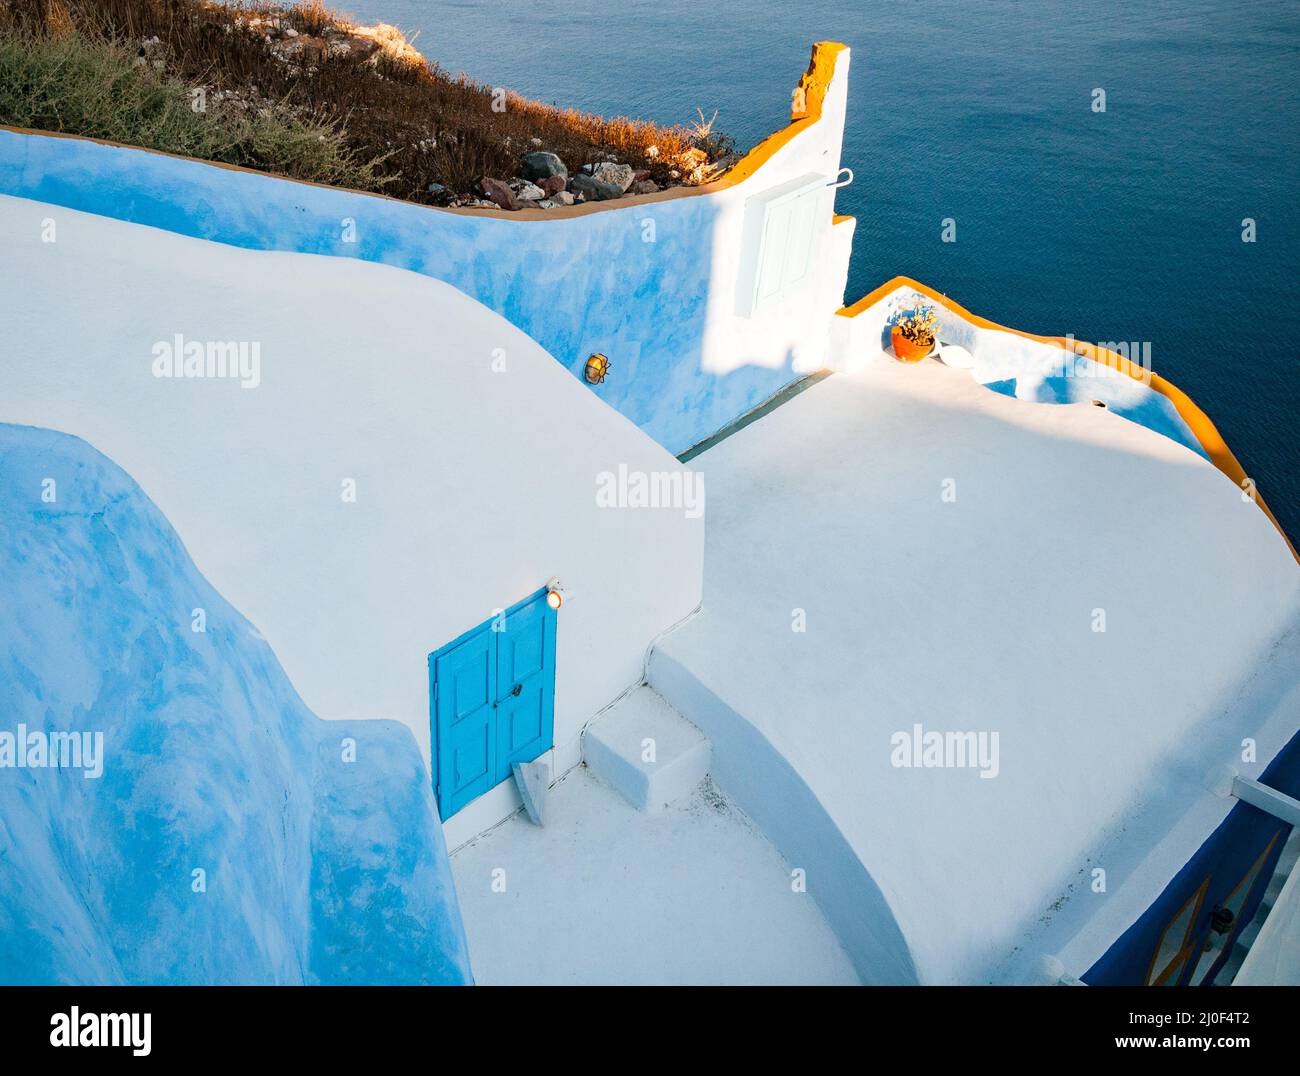 Santorini traditional white and blue architecture. Cyclades Greek islands, Greece. Stock Photo